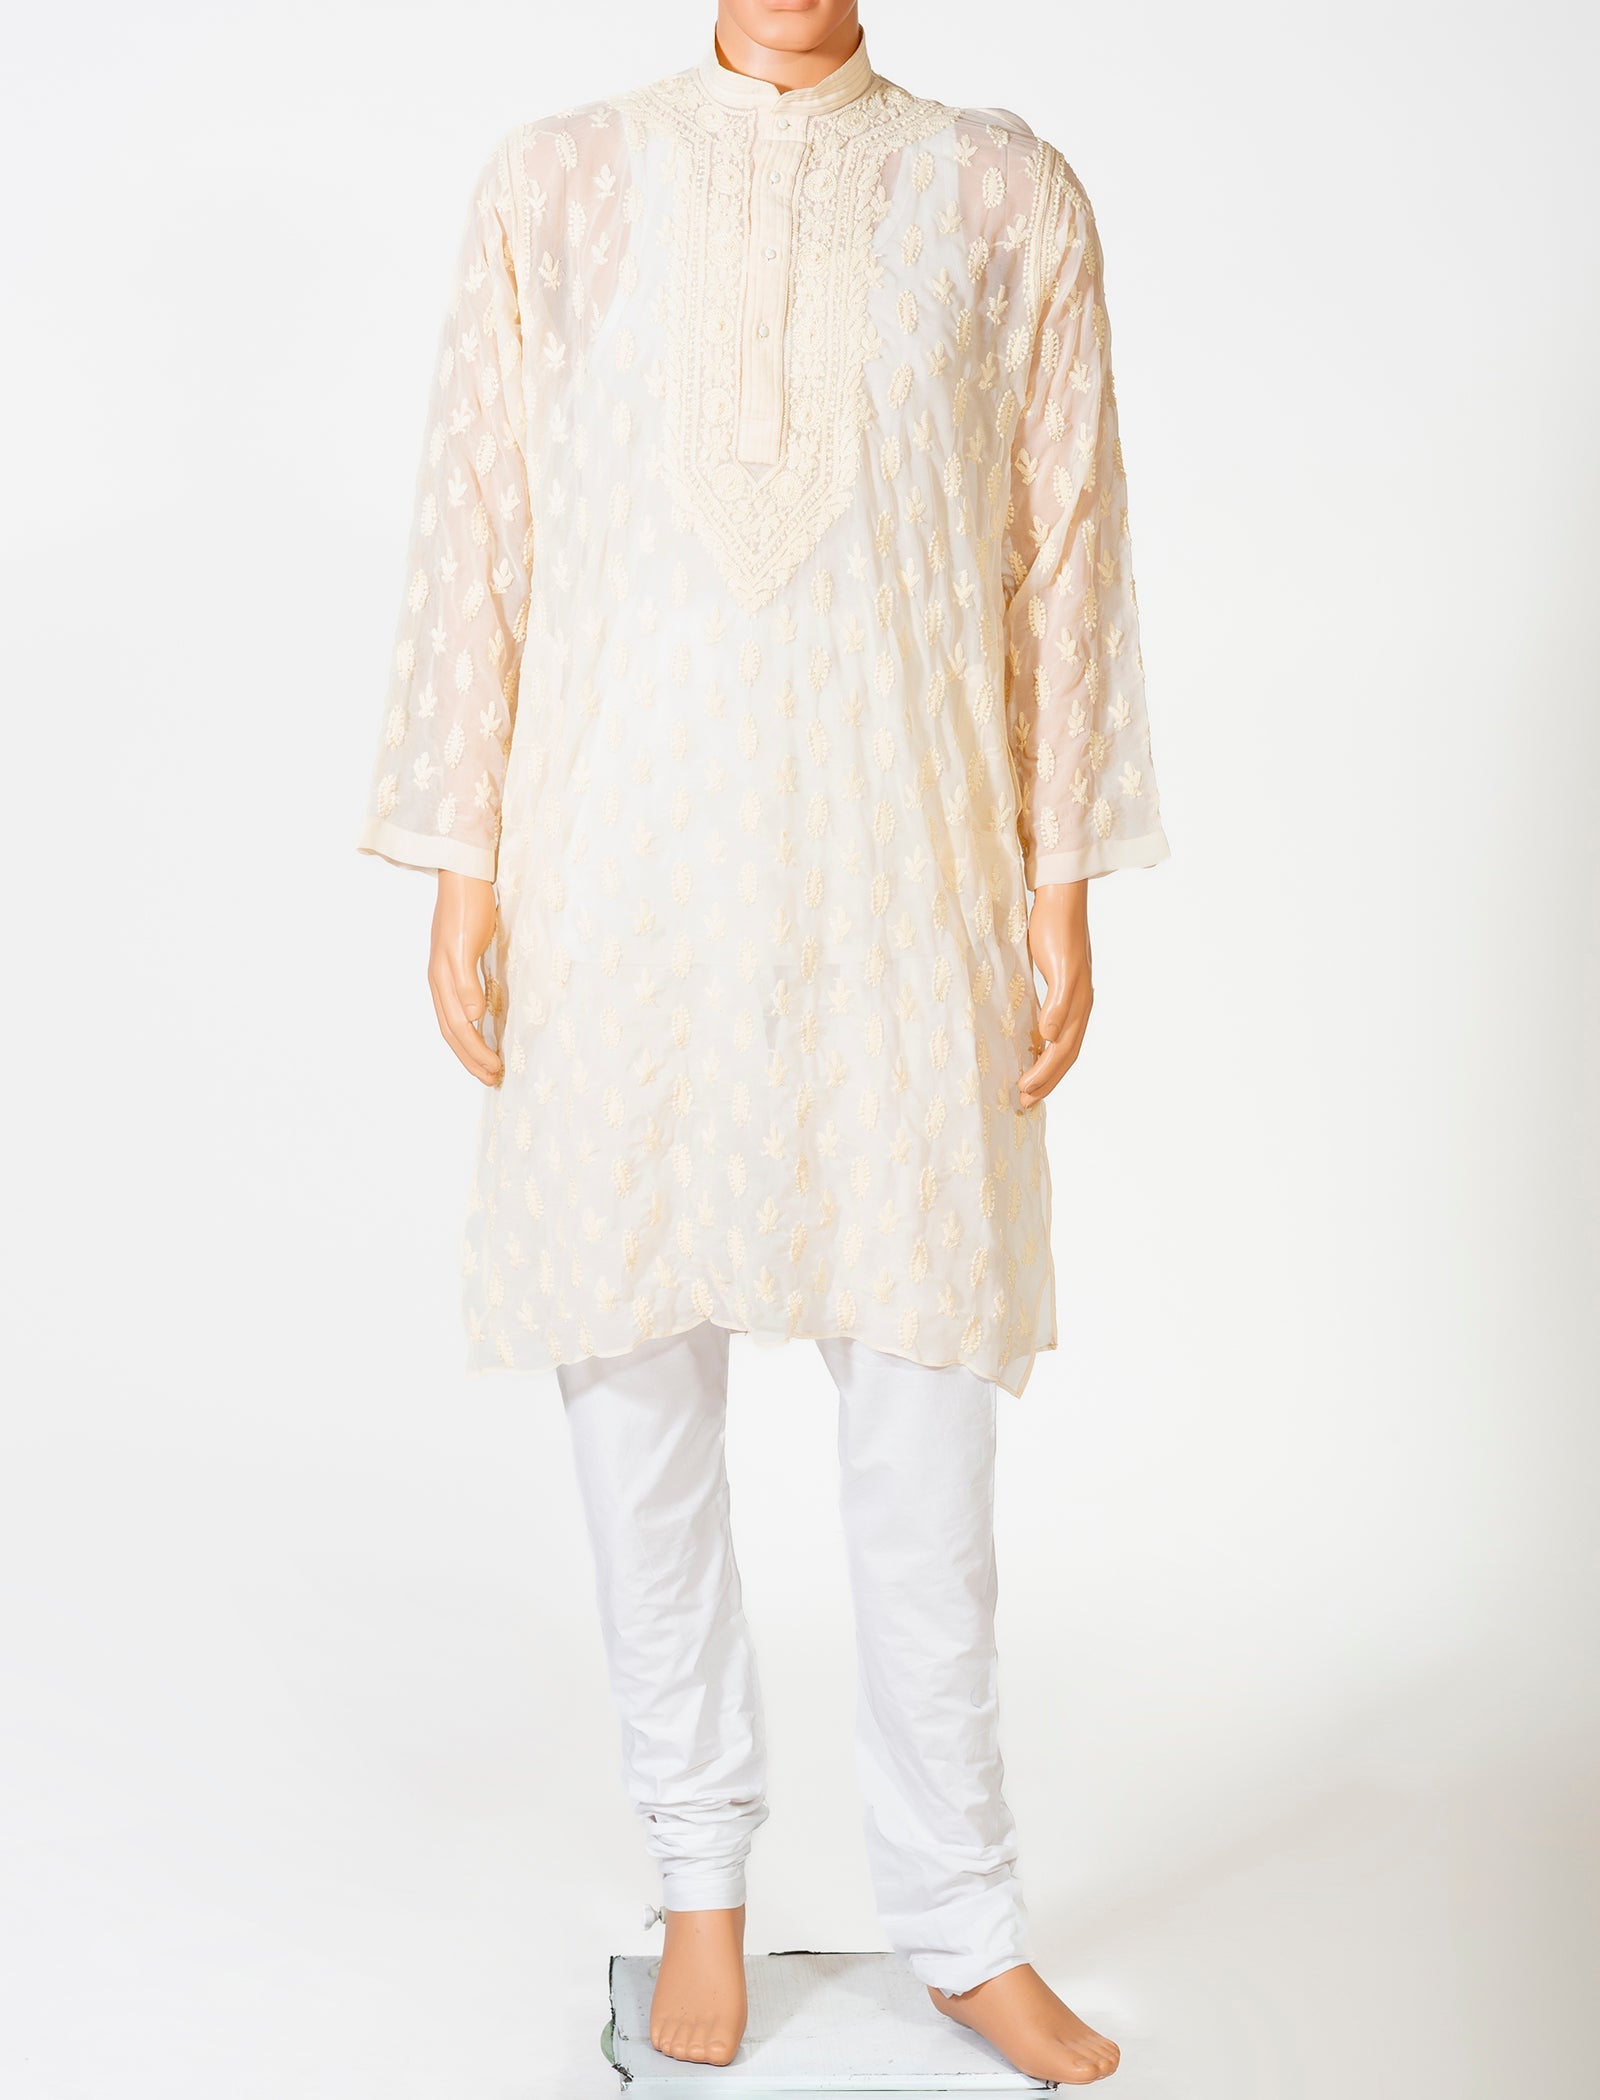 Lucknow Chikan Emporium Georgette Cream Colour Gents Kurta With Self Stripes And Fancy Hand Chikankari On Neck.